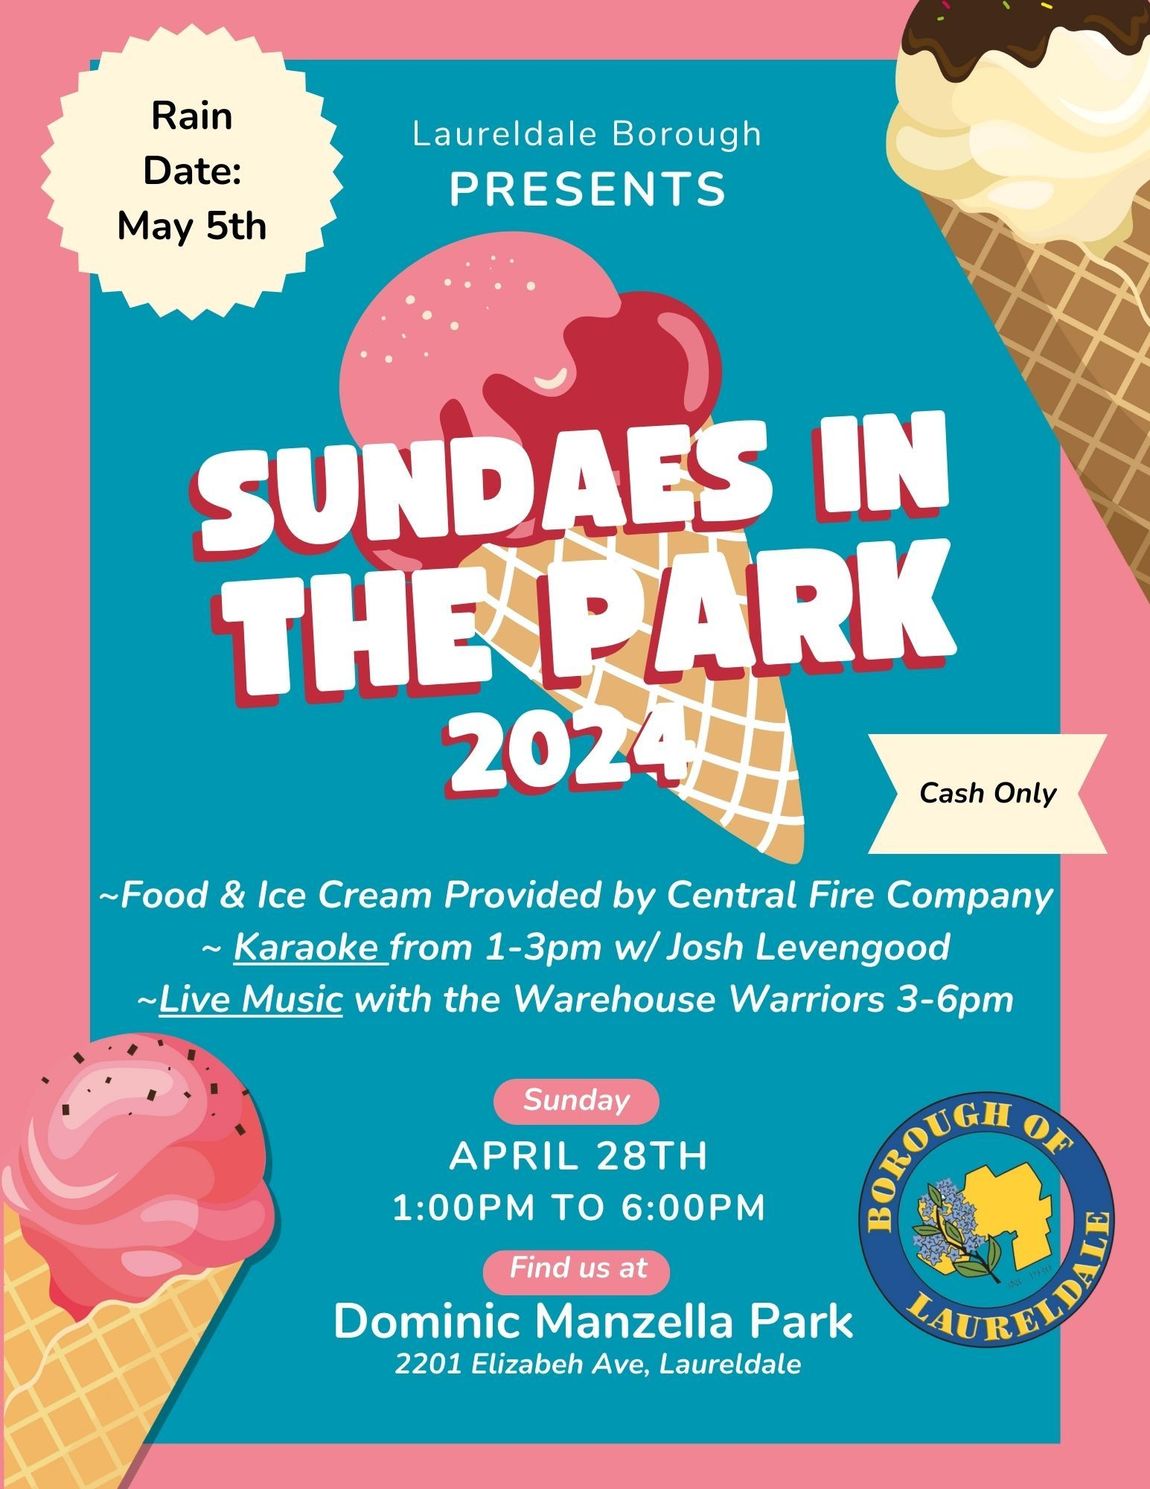 Laureldale Borough presents our Annual Sundaes in the Park 1-6 April 28th. Food, music and fun! (Rain Date May 2nd)